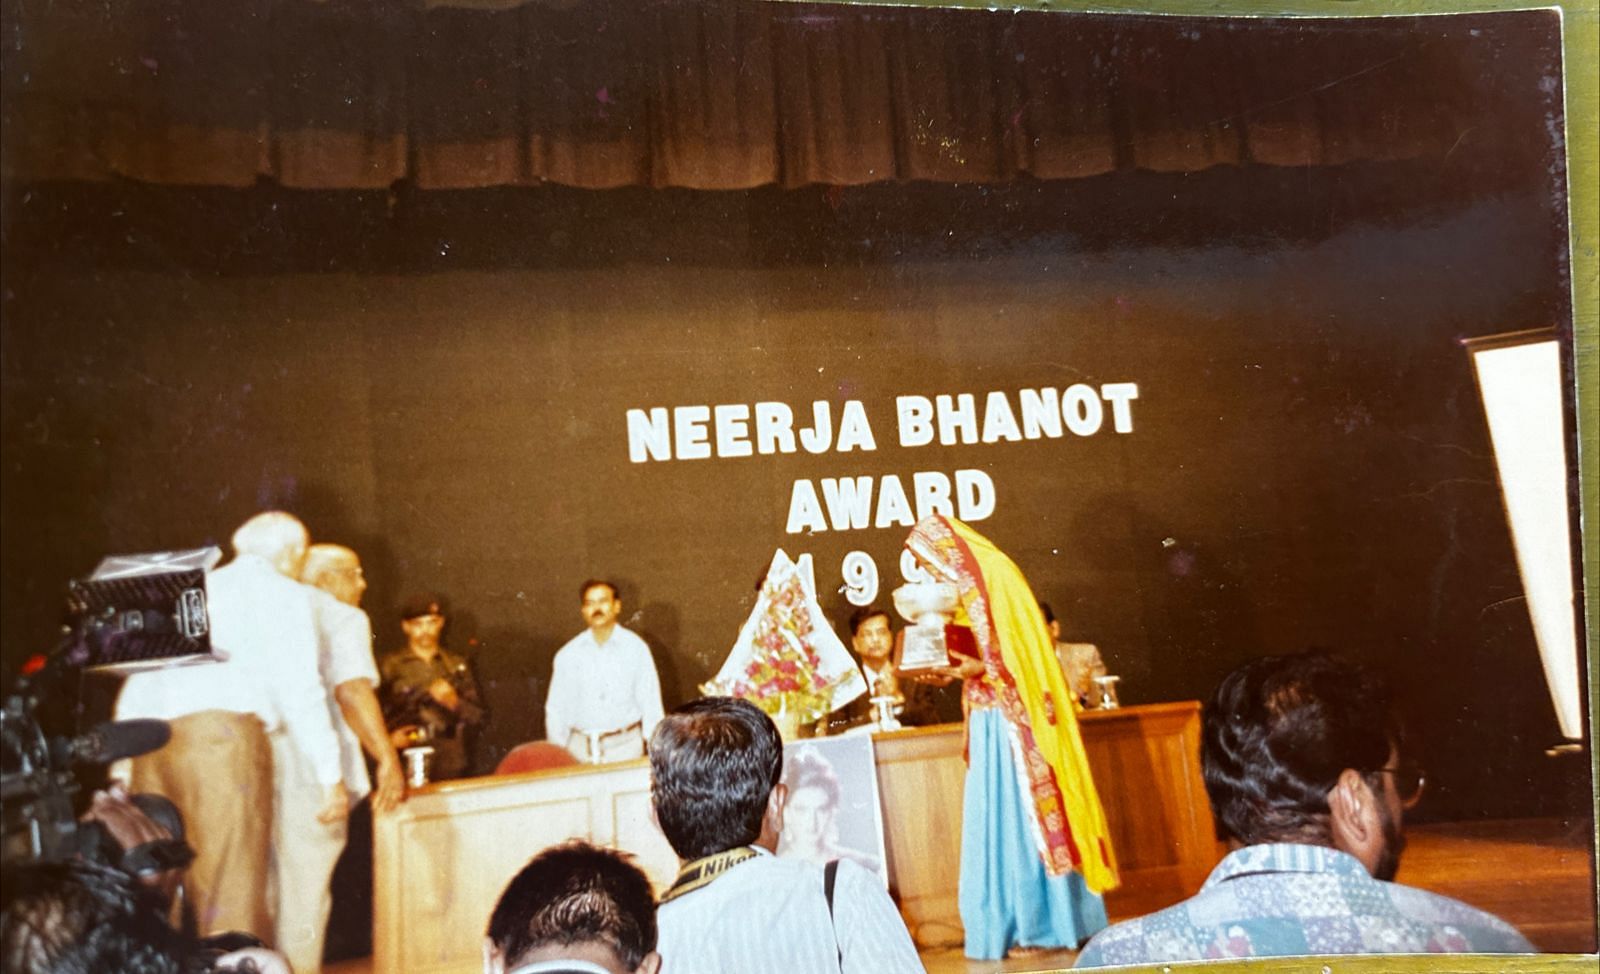 Bhanwari at the award ceremony for the Neerja Bhanot award for bravery | By special arrangement